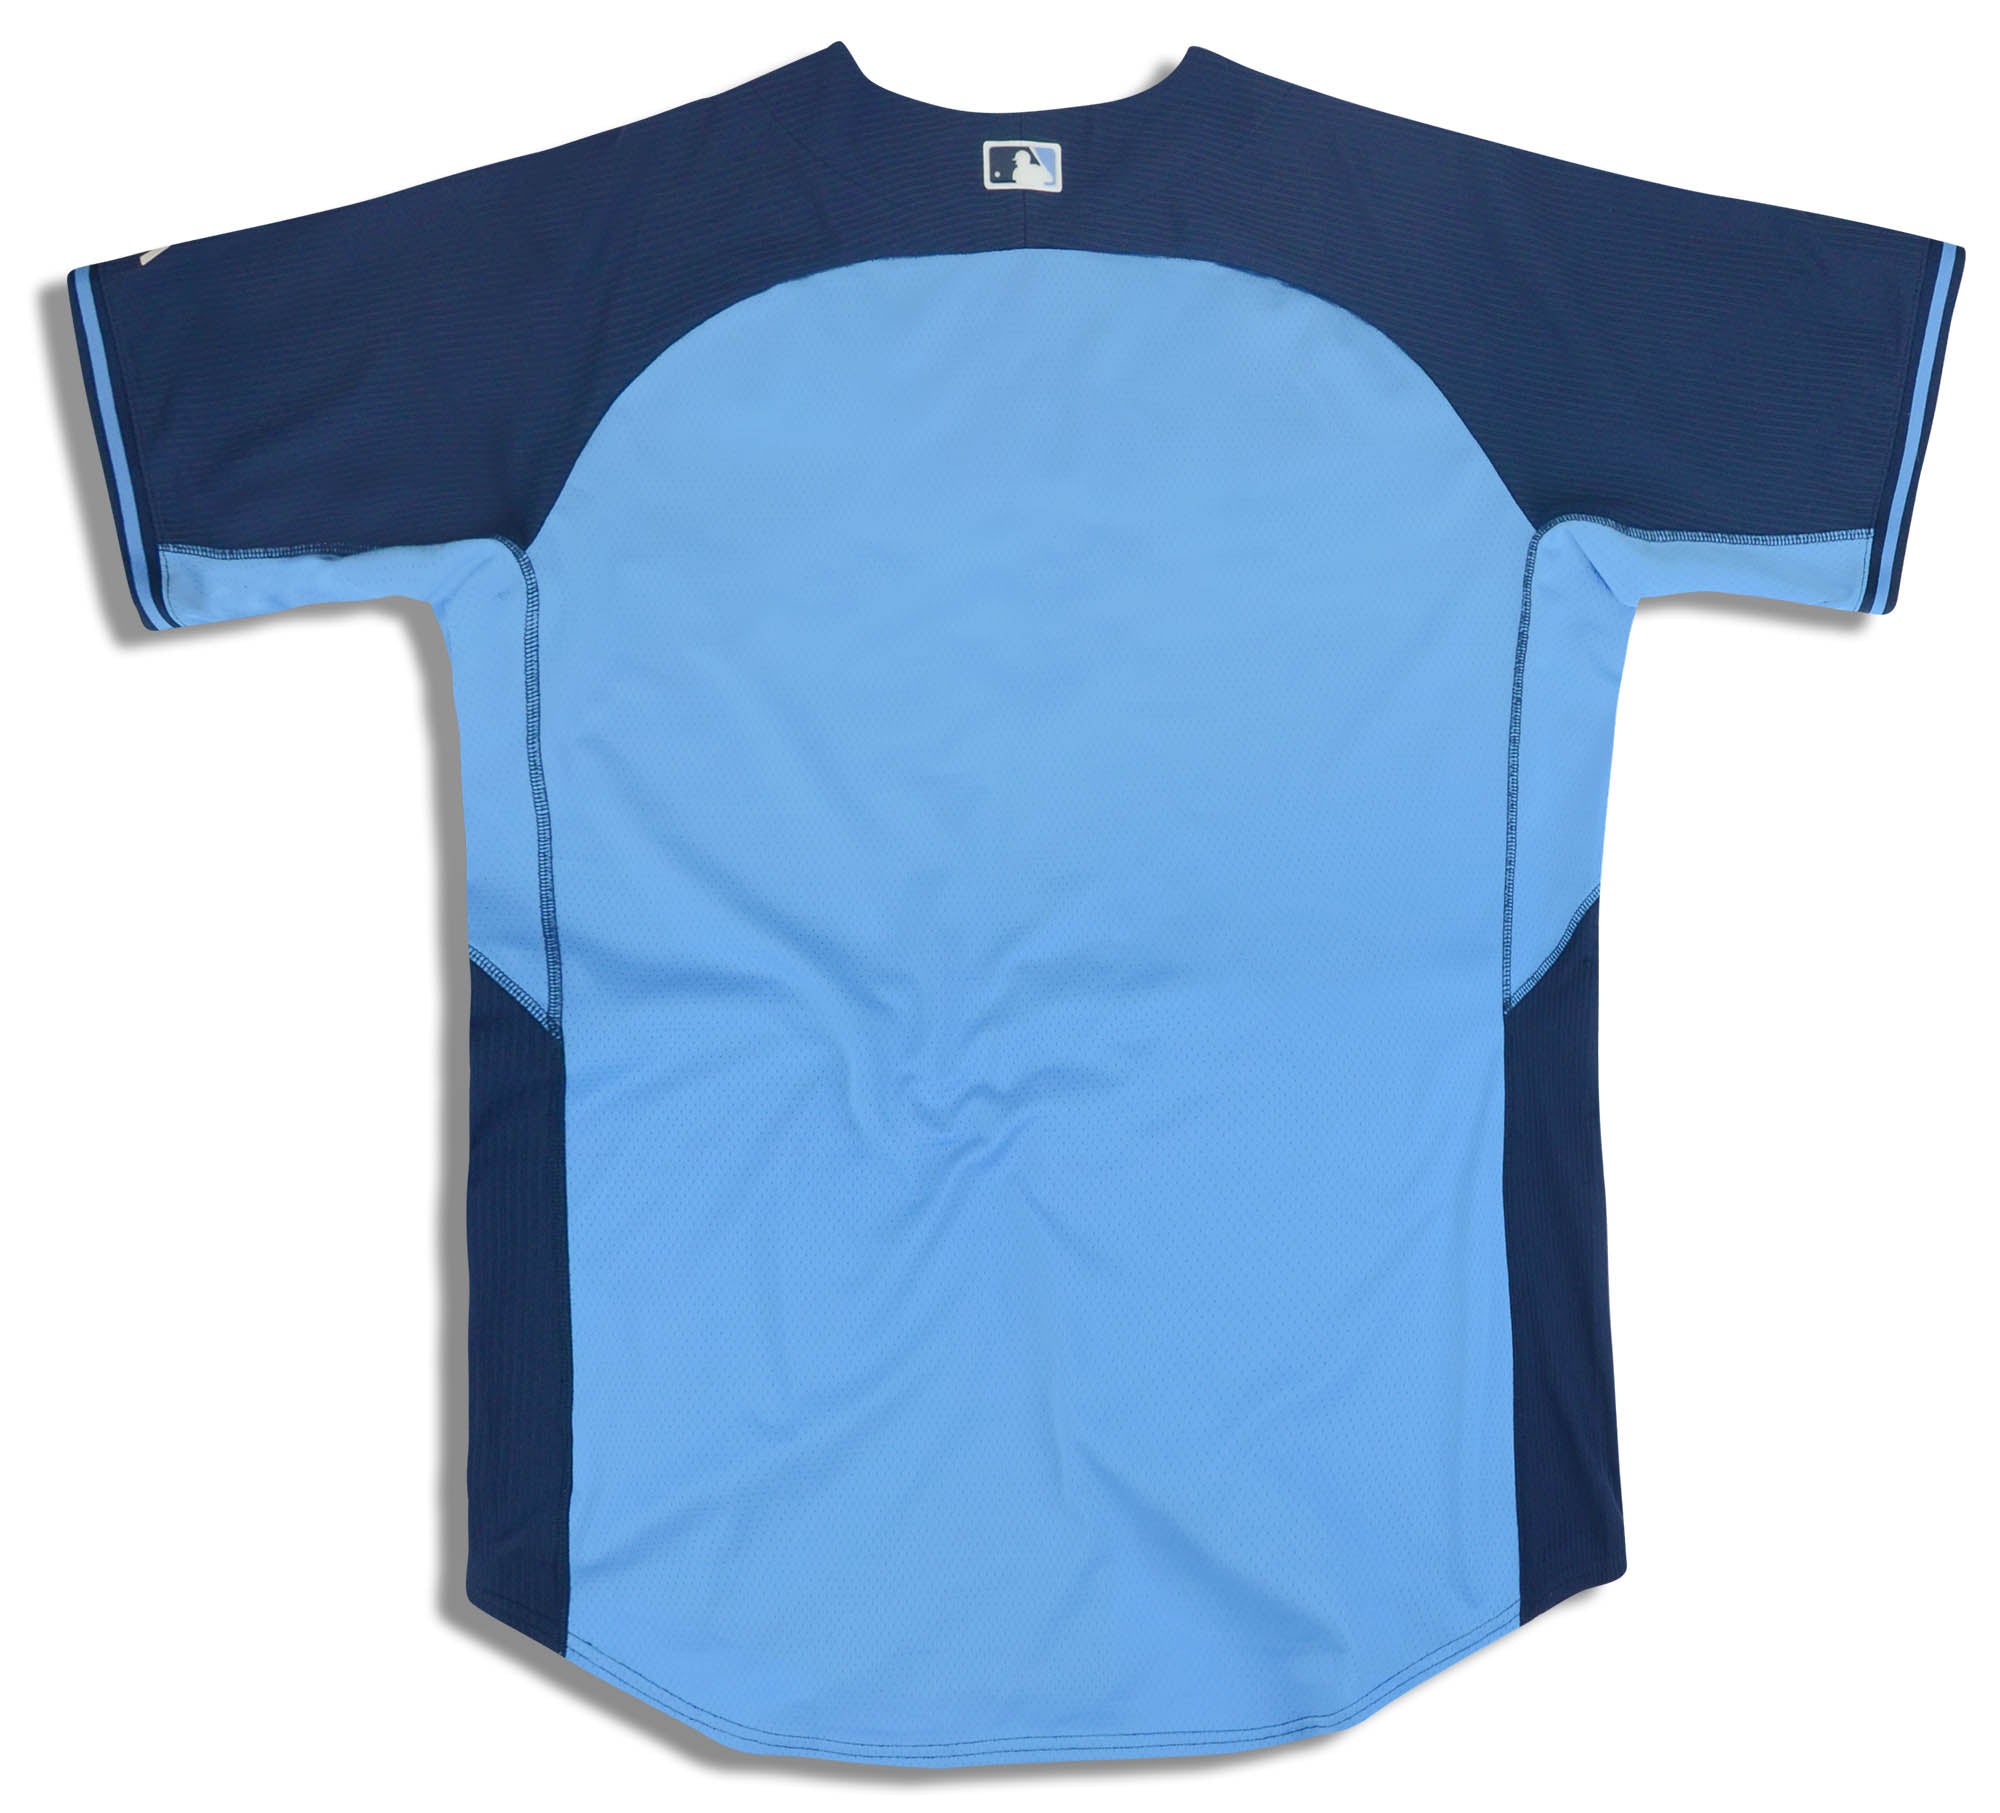 Tampa Bay Rays Majestic Official Cool Base Jersey - Light Blue